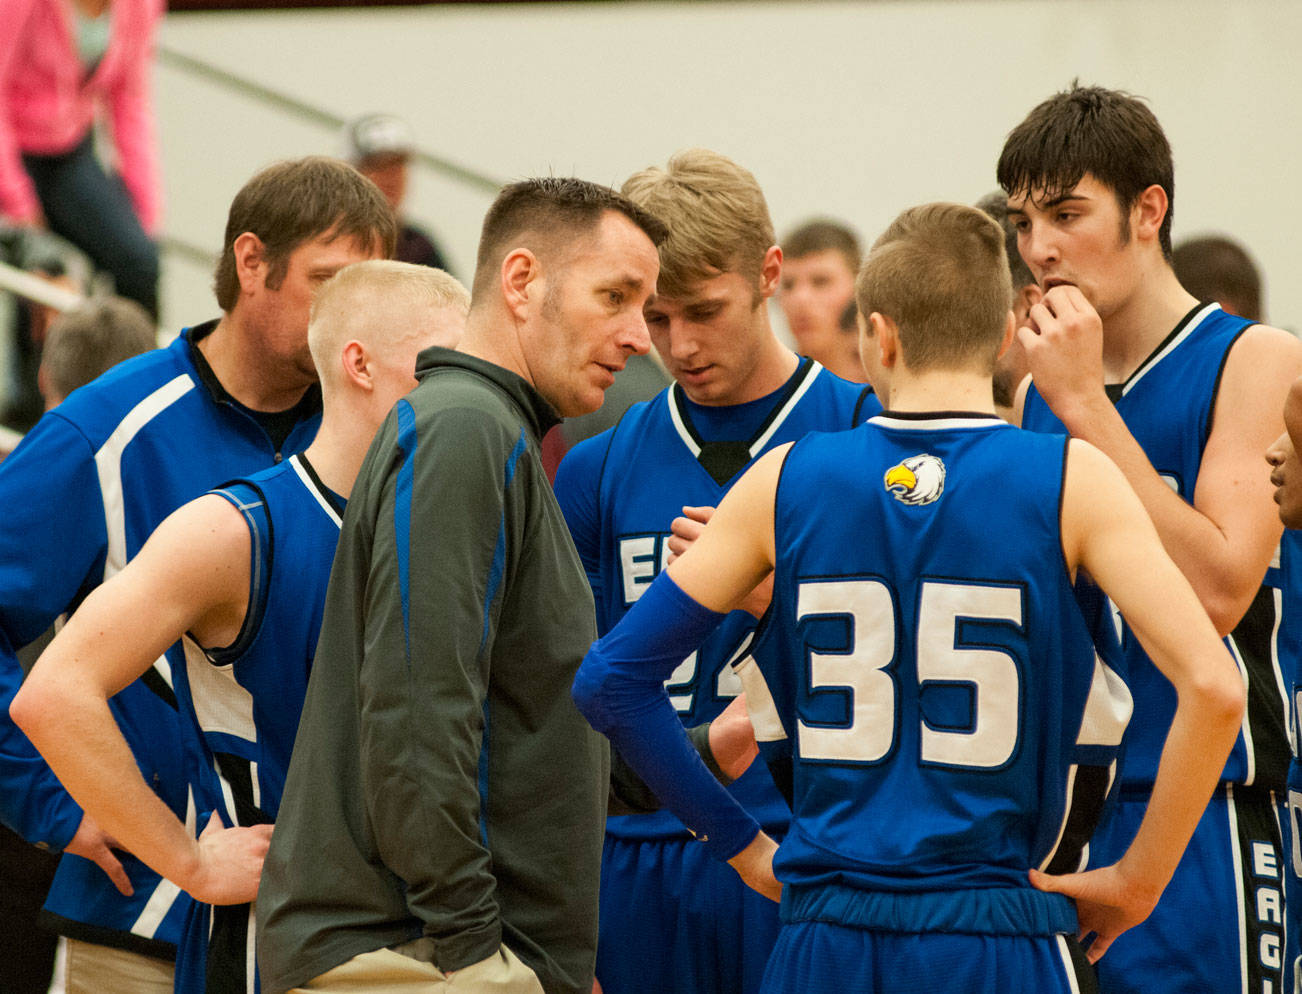 (Brendan Carl | Grays Harbor Newspaper Group) Elma head coach Marvin Prince is seen talking to his players during an Evergreen 1A League contest in 2016. Prince, who had been with the program for more than 20 years and the last 14 years as head coach, stepped down recently.